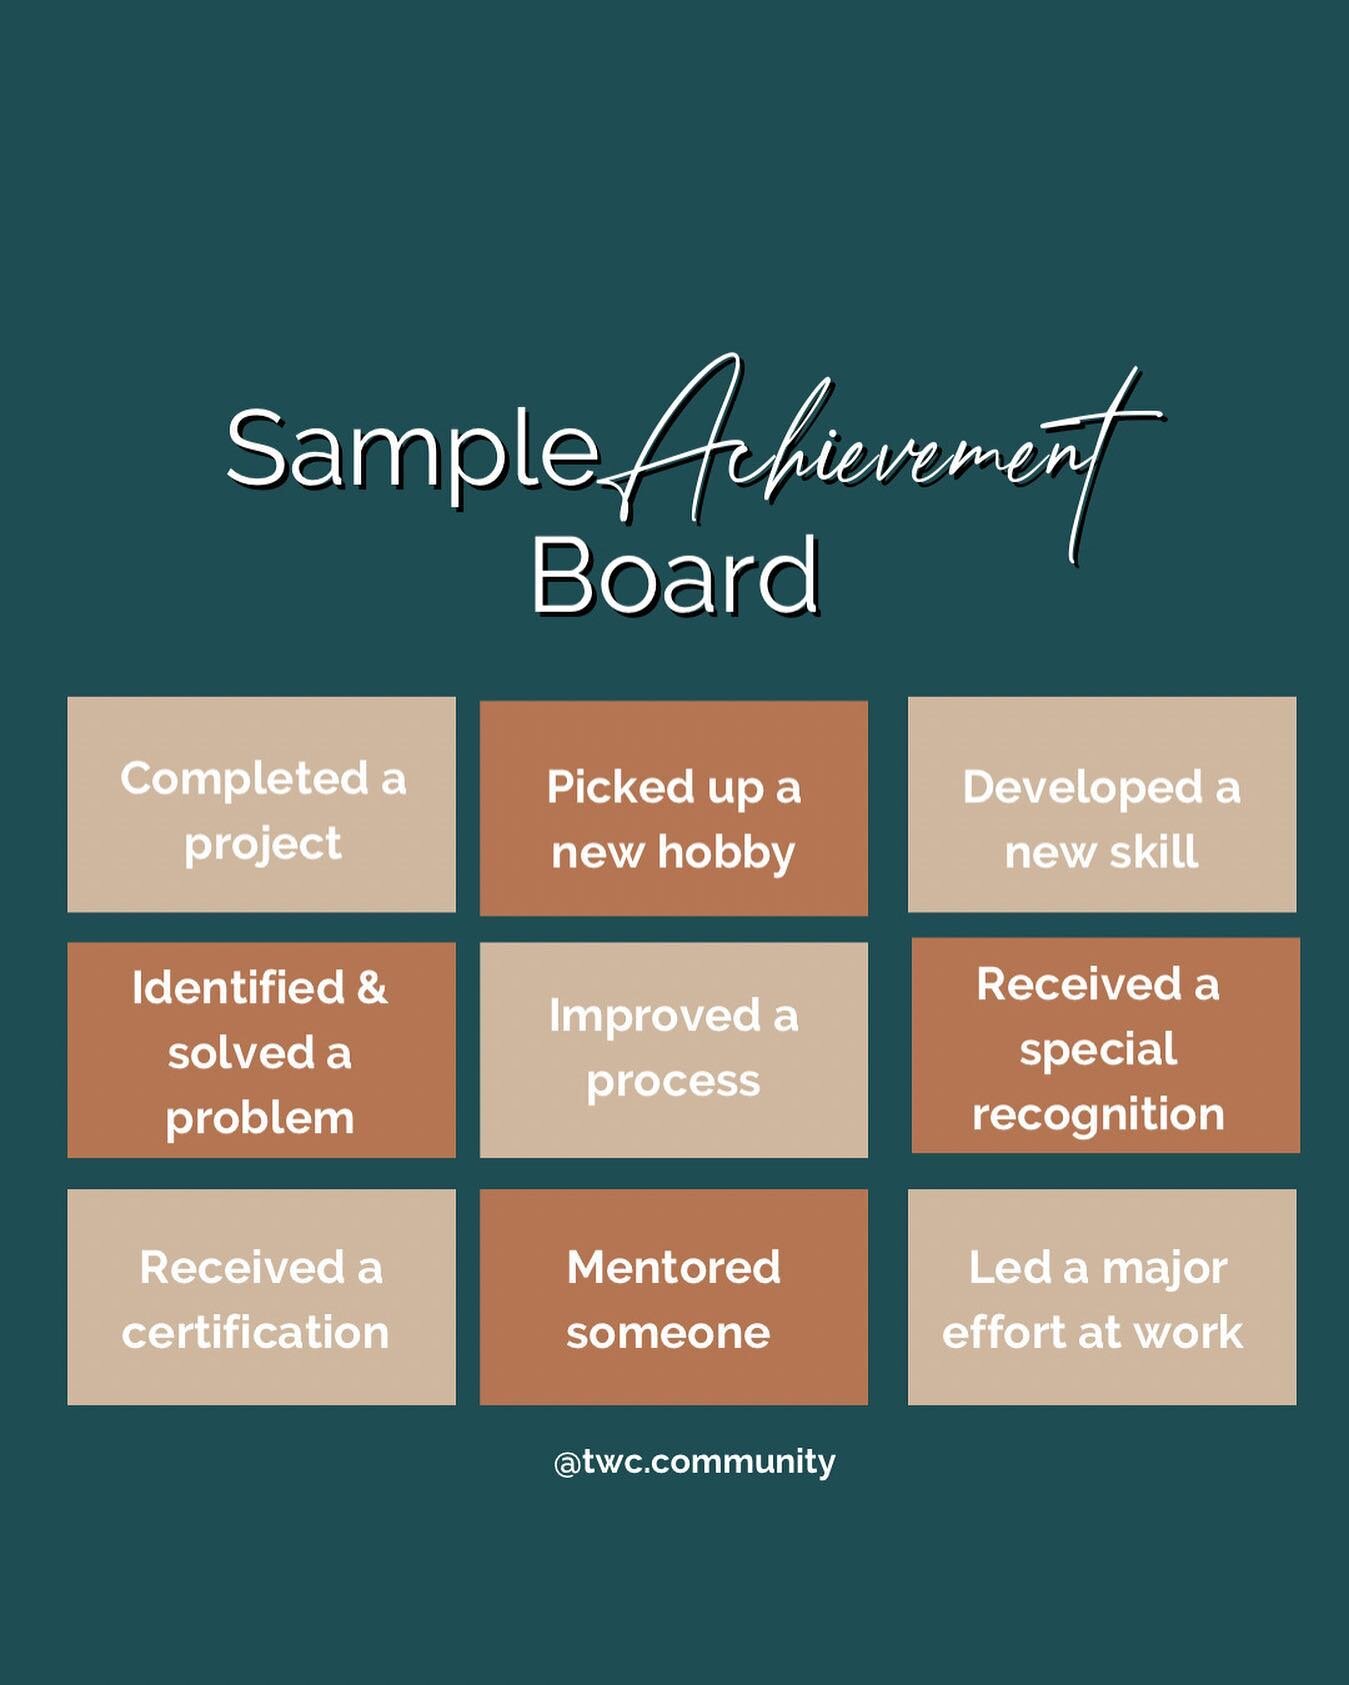 One of my absolute favorite personal career tools is my achievement board 🫶🏾
⠀⠀⠀⠀⠀⠀⠀⠀⠀
Tracking achievements at work helps me:
📍 stay motivated and focused on my career goals
📍 record successes to reference during performance reviews
📍 identify 